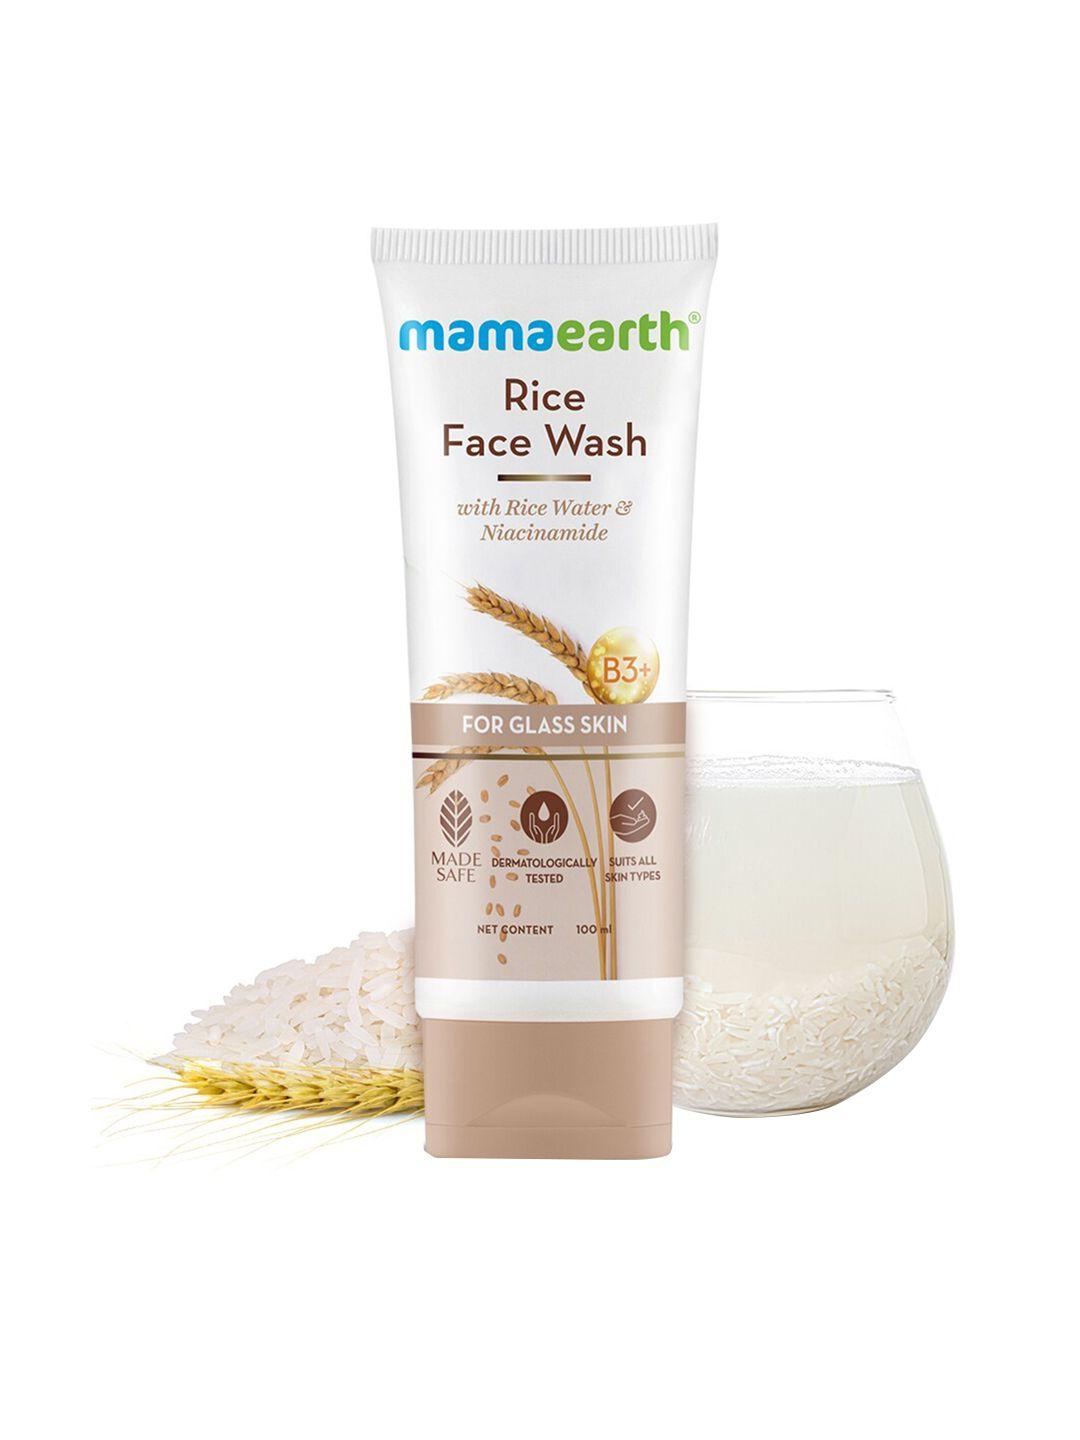 mamaearth rice face wash with rice water & niacinamide for glass skin - 100ml